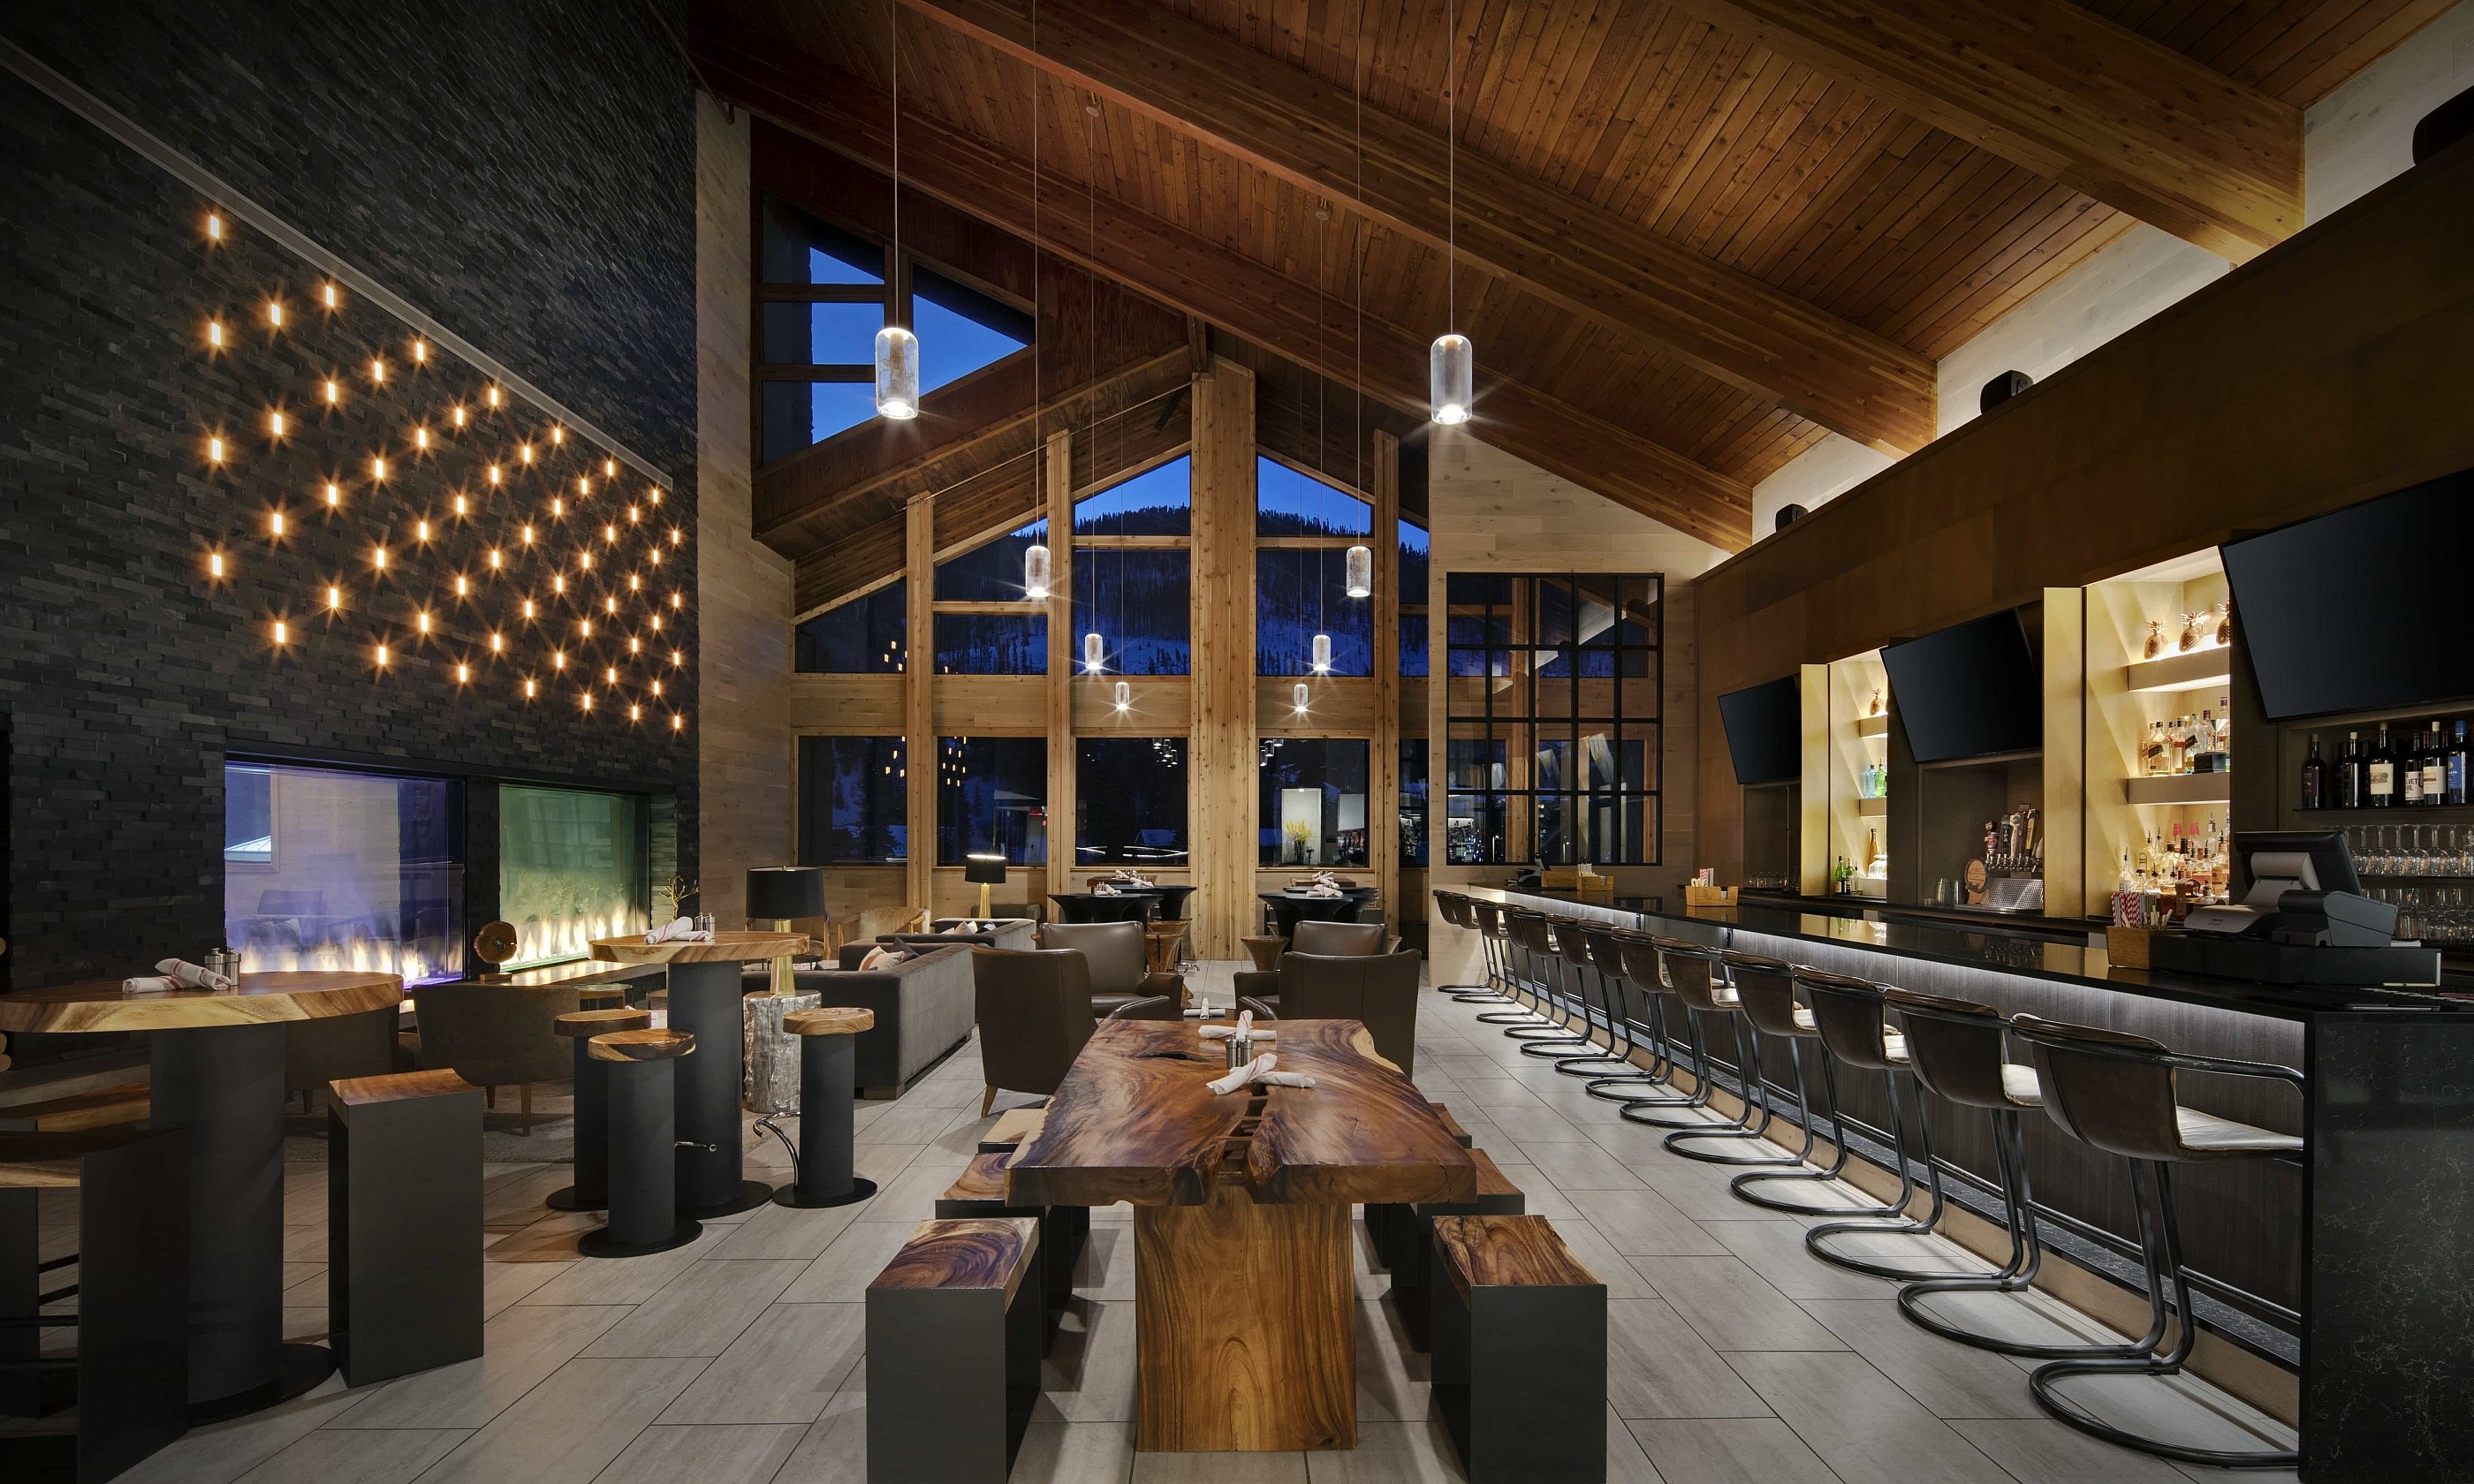 Restaurant and bar at the DoubleTree Hotel in Vail